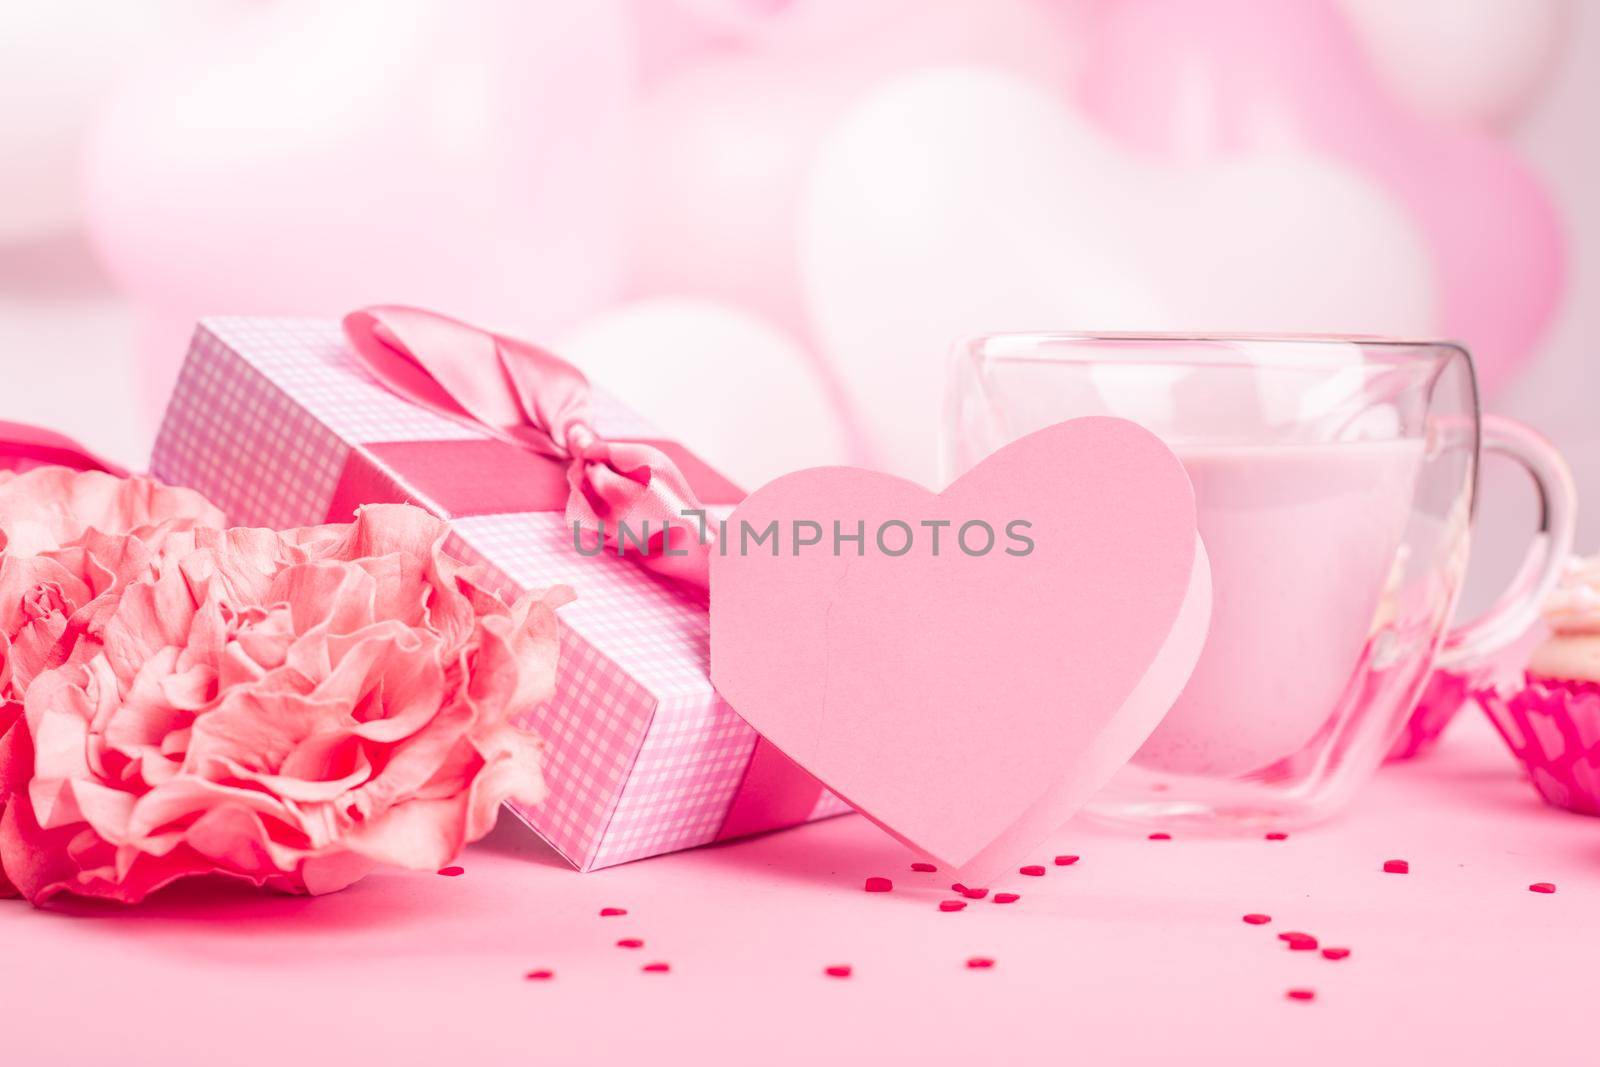 Valentine Day gift in a box wrapped in striped paper and tied with silk ribbon bow and dessert on pink balloons background with copy space for text